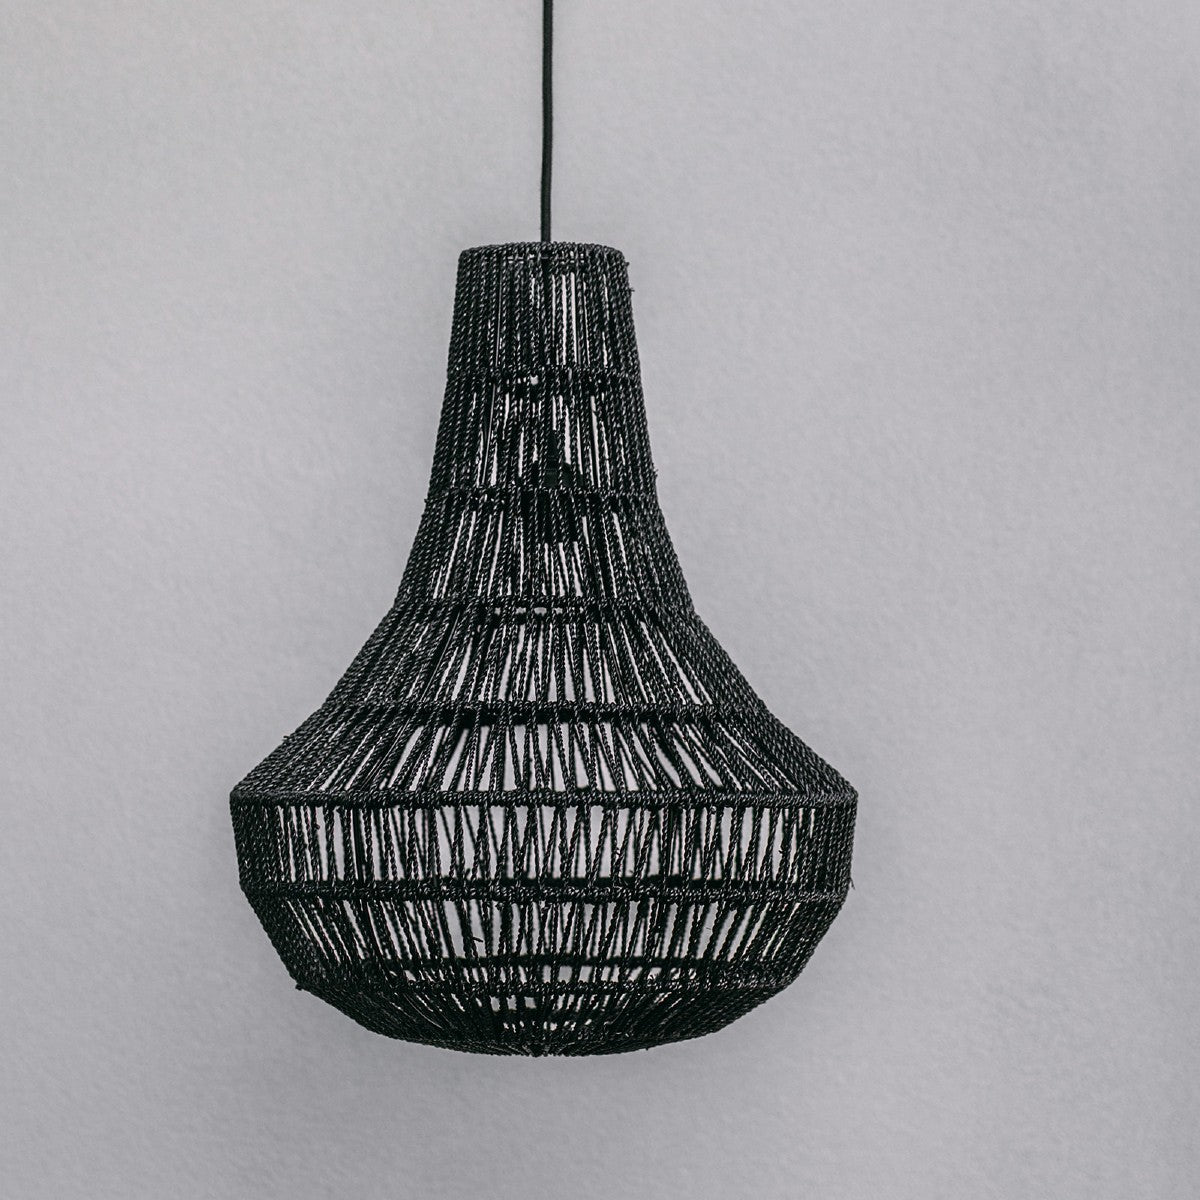 Seagrass Hamptons pendant light. Burliegh pendant phtographes against a grey back ground to enable you to see the detail in the light shade.